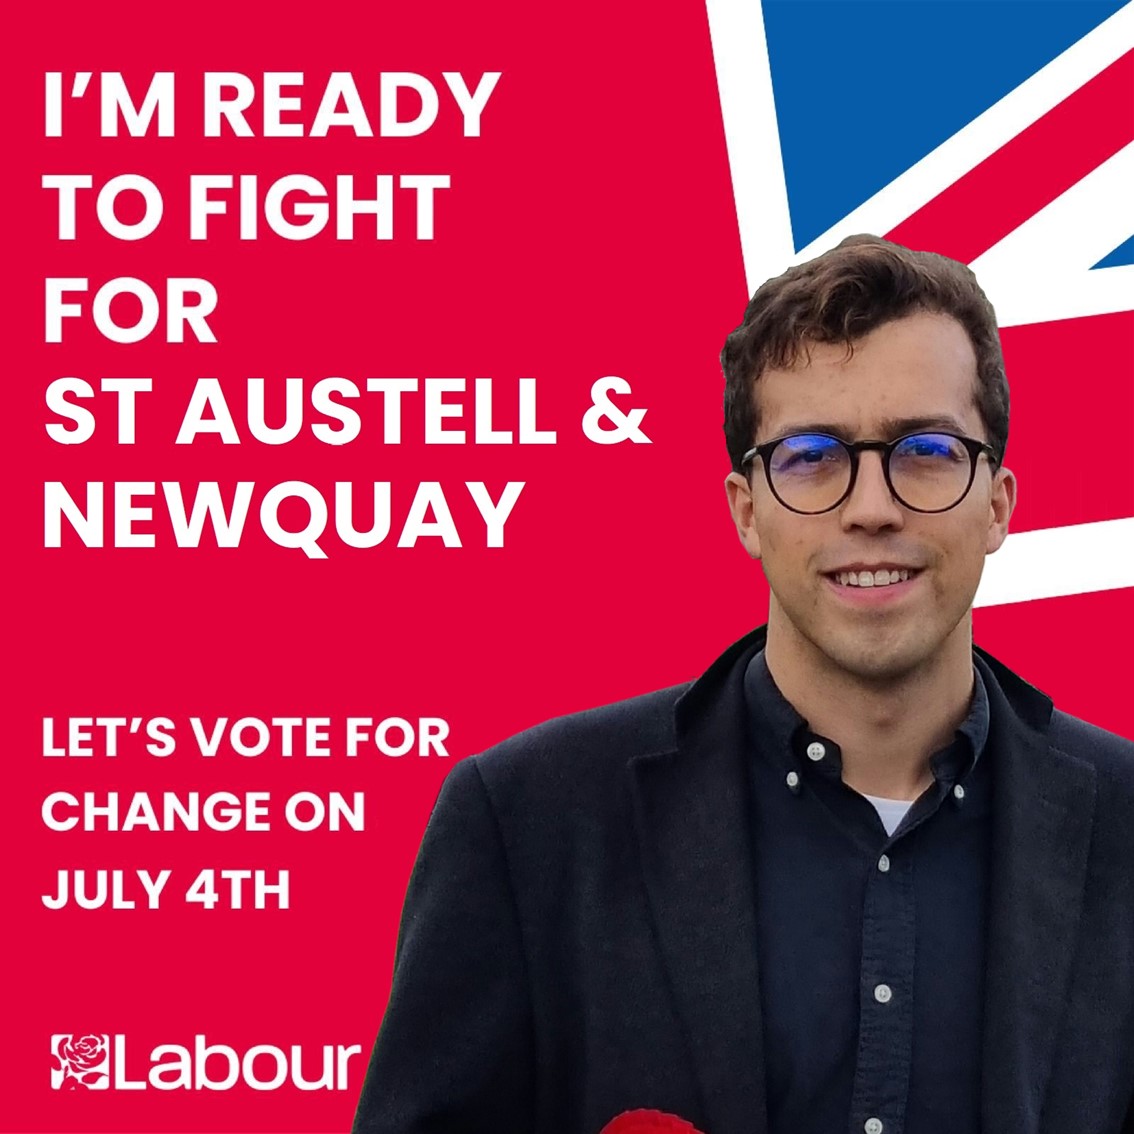 I'm honoured to be the @UKLabour candidate for St Austell & Newquay in the #GeneralElection. It's time for a fresh start. Join our campaign! volunteer.labour.org.uk/get-started